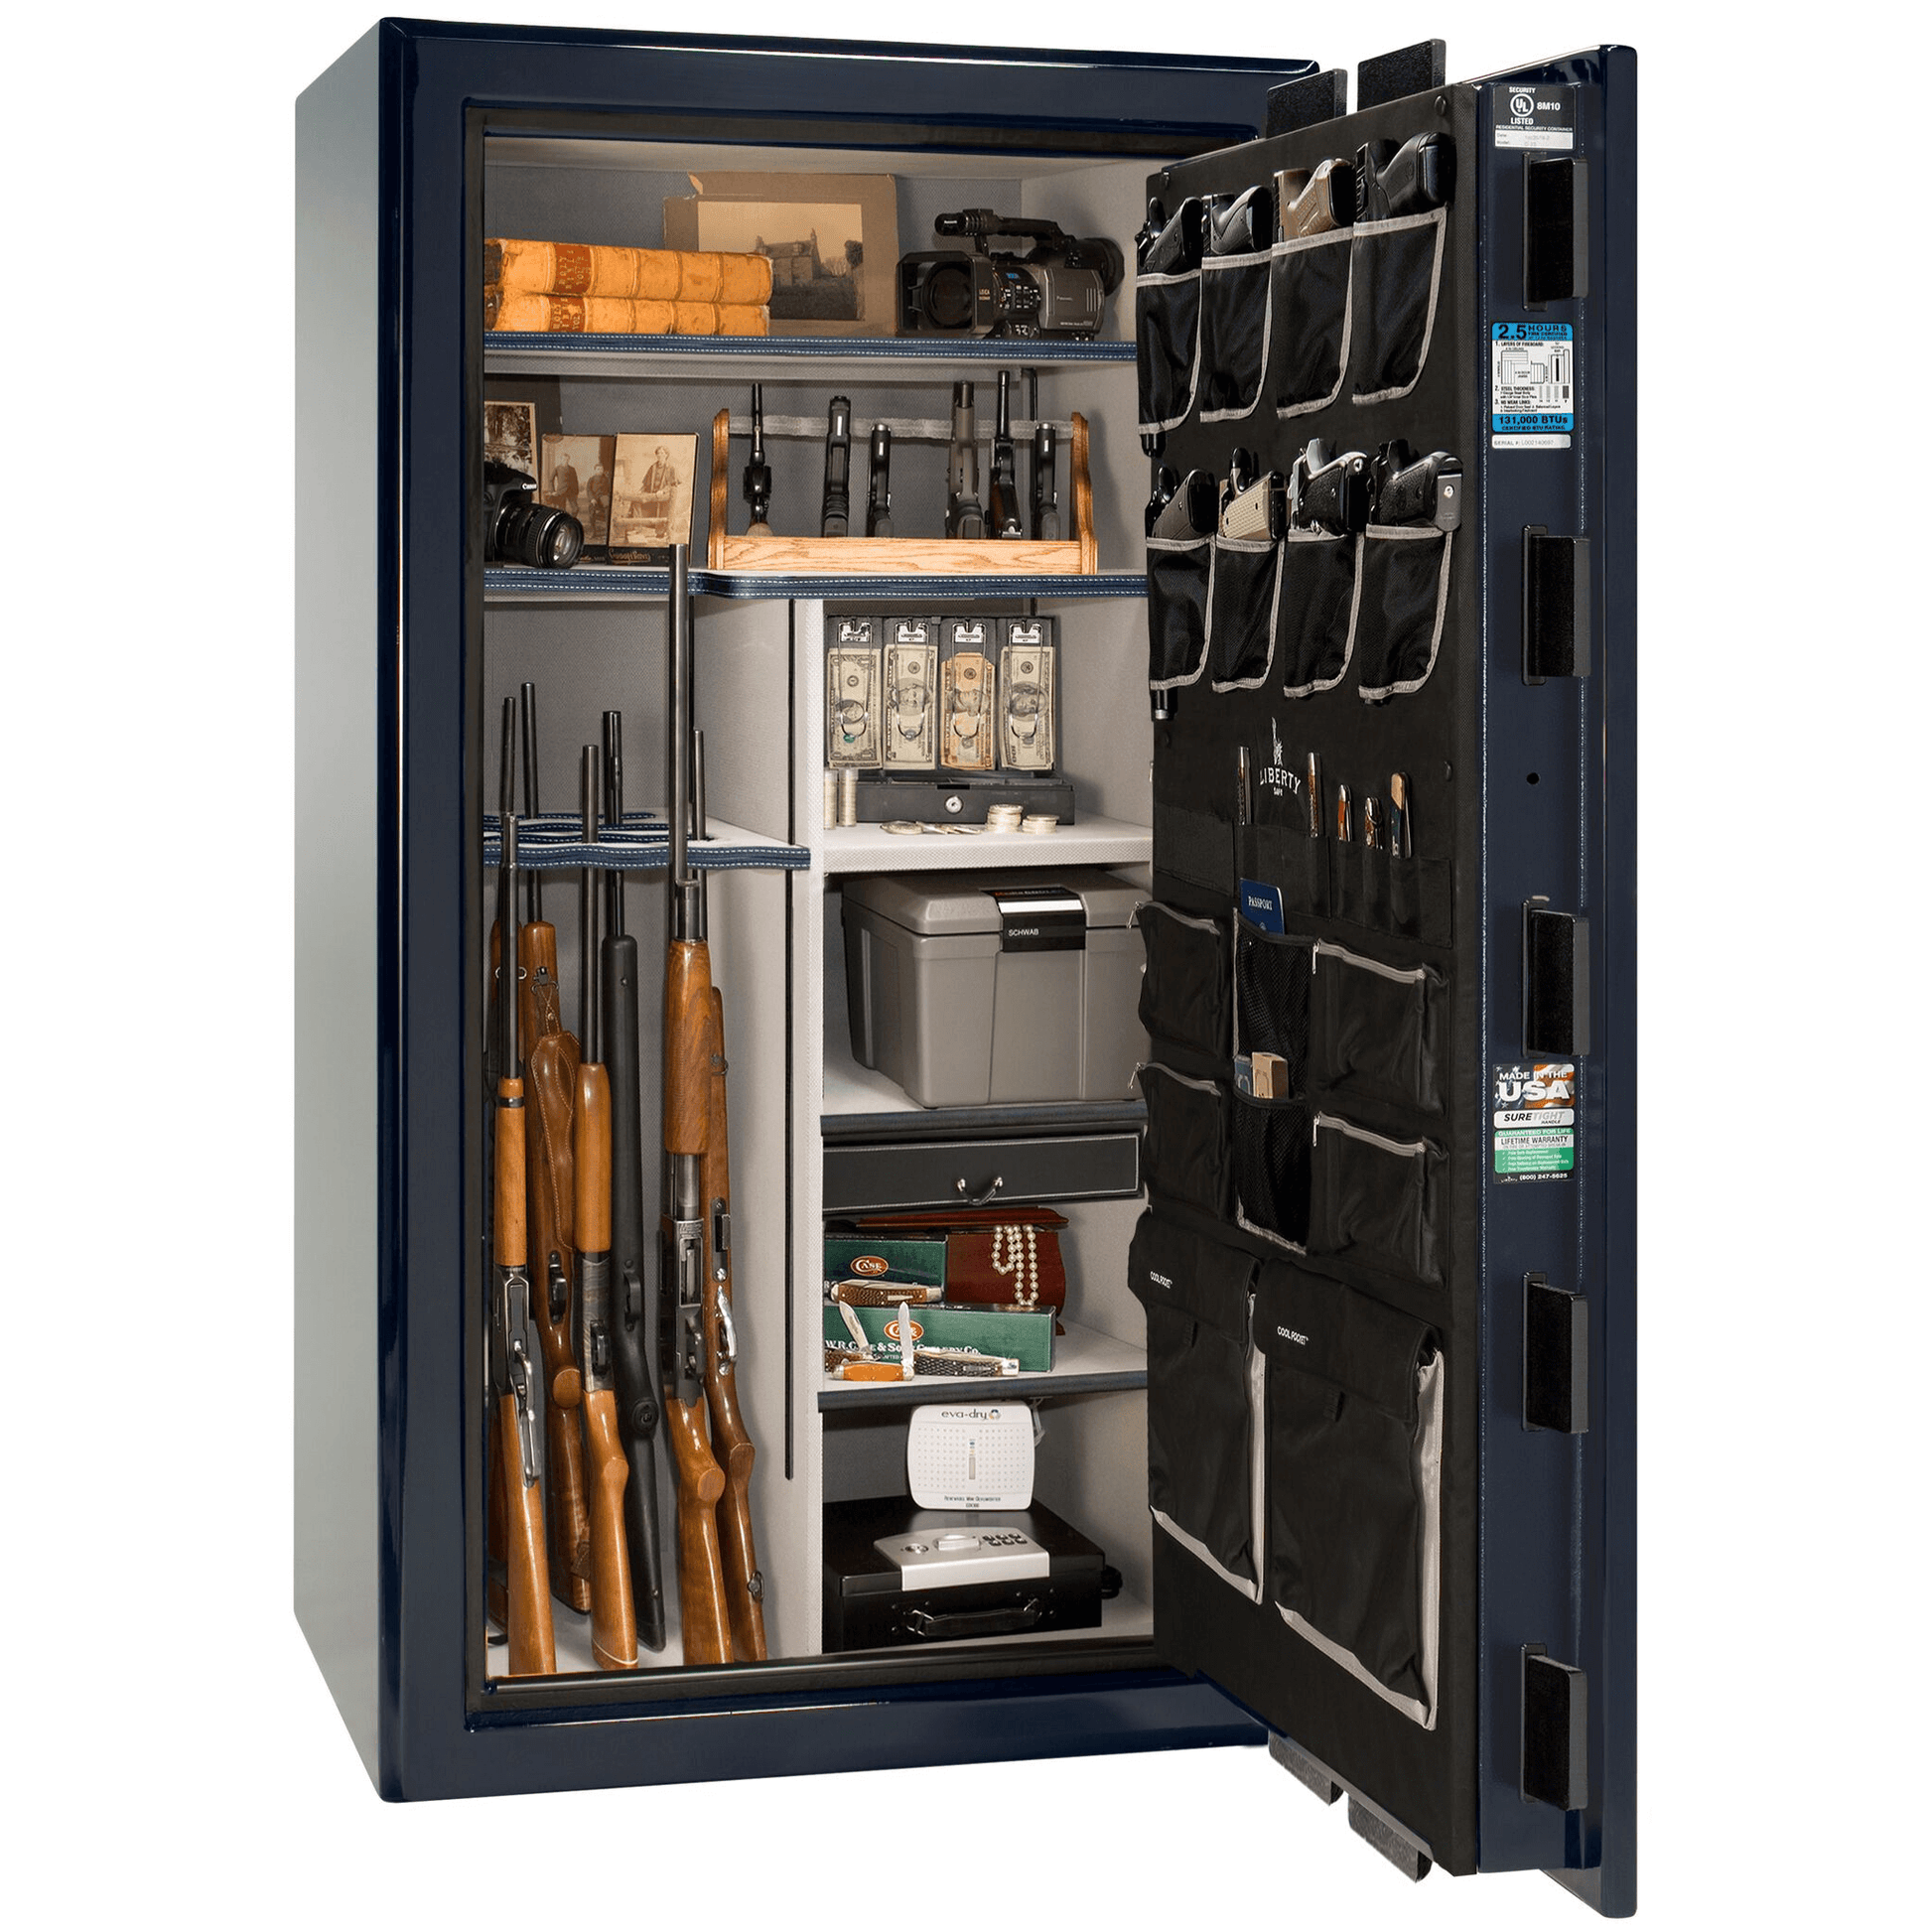 Presidential Series | Level 8 Security | 2.5 Hours Fire Protection | 40 | Dimensions: 66.5"(H) x 36.25"(W) x 32"(D) | Blue Gloss | Chrome Hardware | Electronic Lock